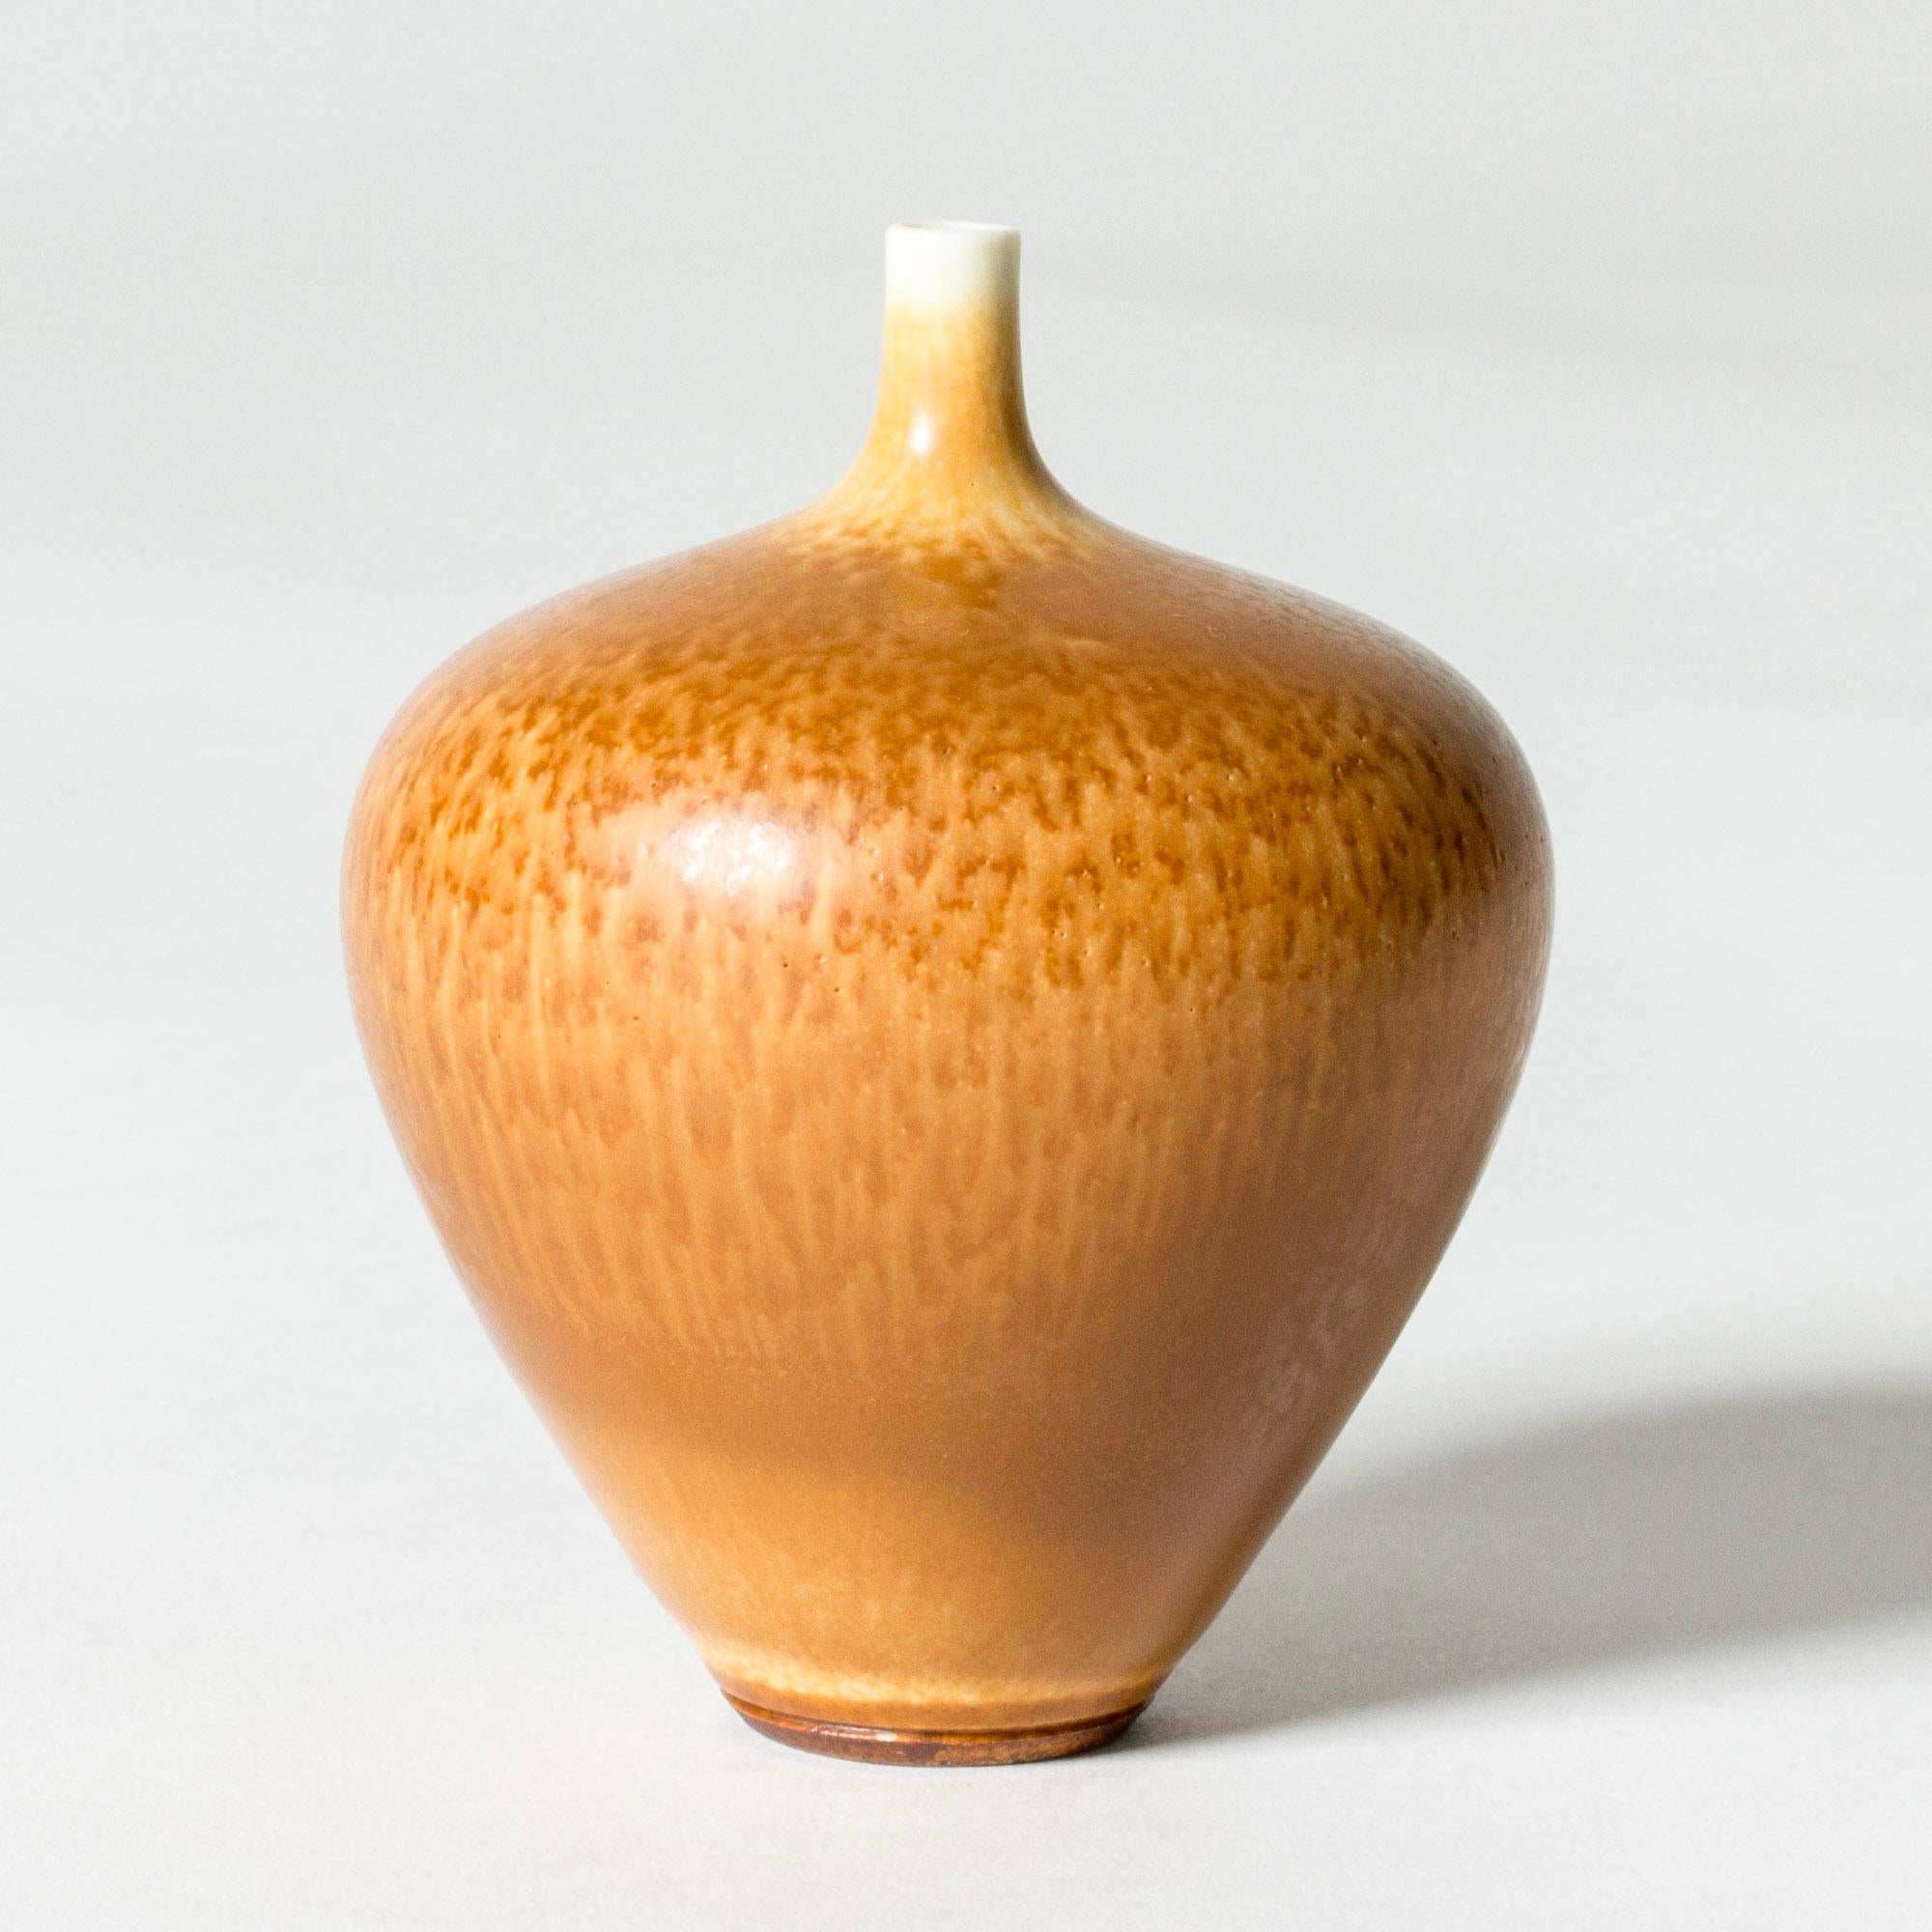 Lovely miniature stoneware vase by Berndt Friberg, in an ample apple form with a thin neck. Decorated with warm ochre hare’s fur glaze.

Berndt Friberg was a Swedish ceramicist, renowned for his stoneware vases and vessels for Gustavsberg. His pure,